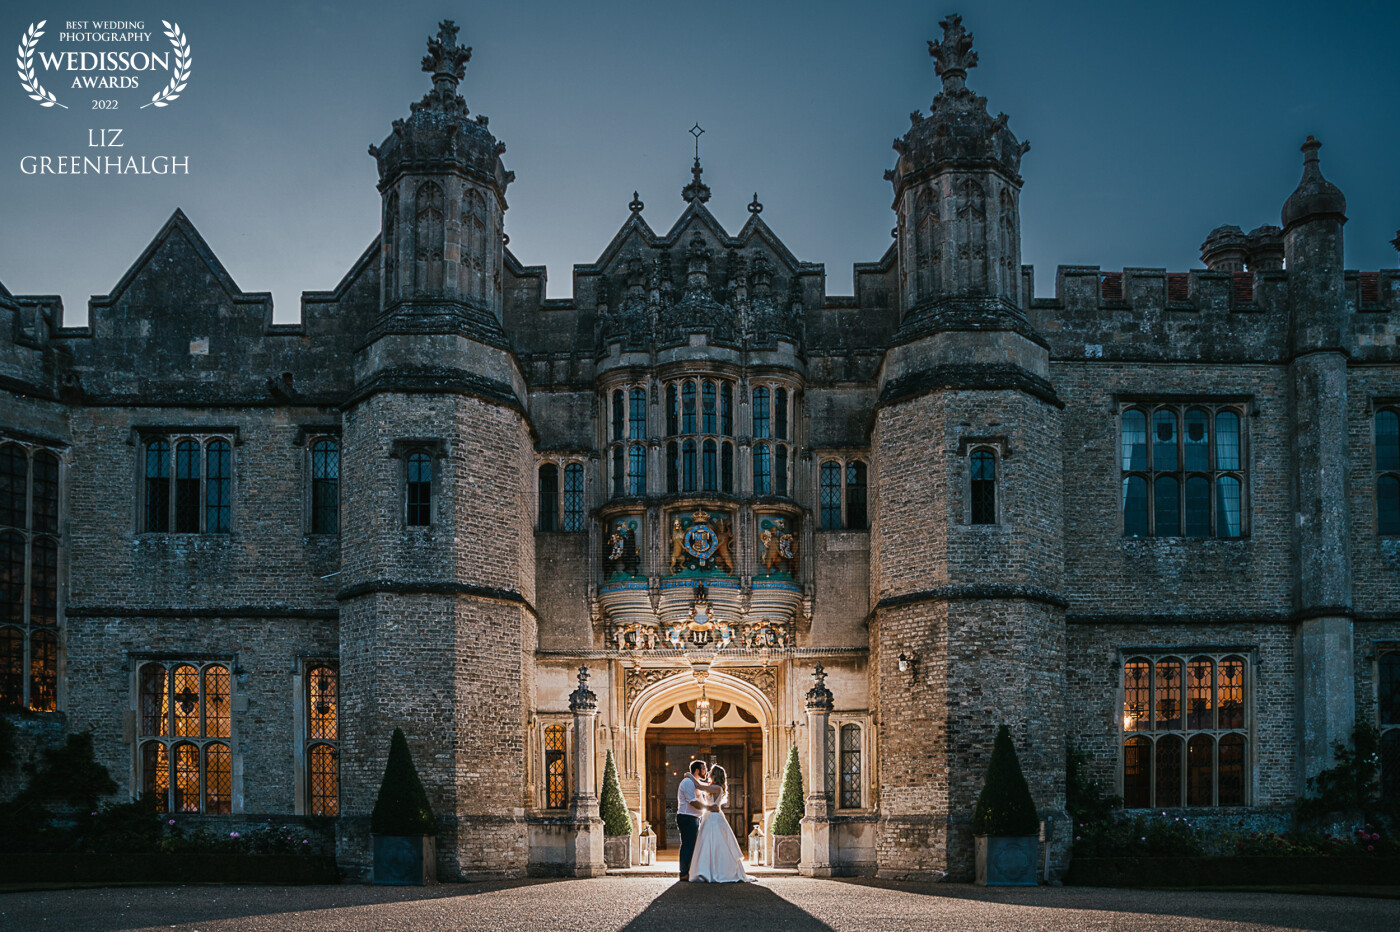 A wonderful evening shot of the fabulous wedding at Hengrave Hall one Summers evening in July.  The front of the building made the perfect shot